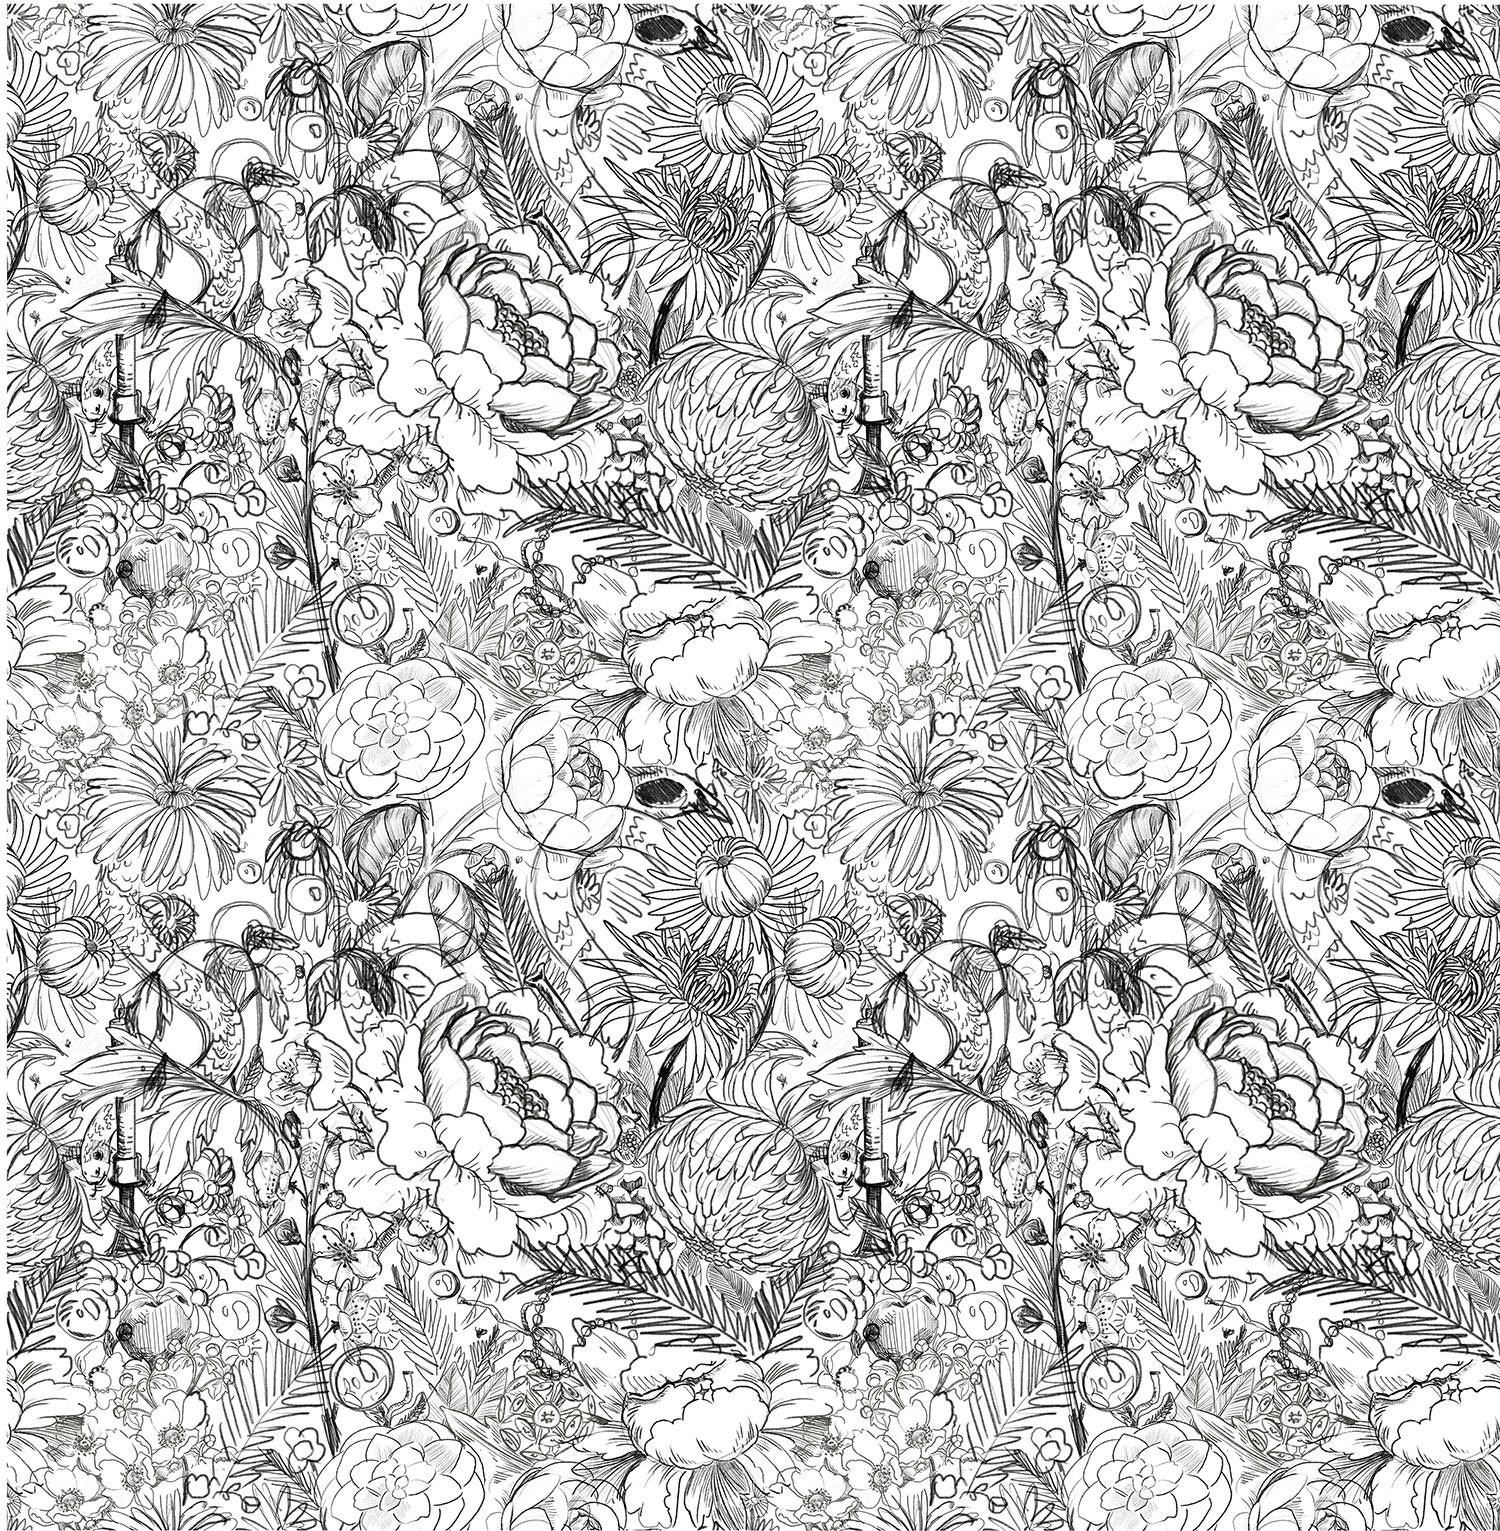 Black and white botanical sketch of for a pattern